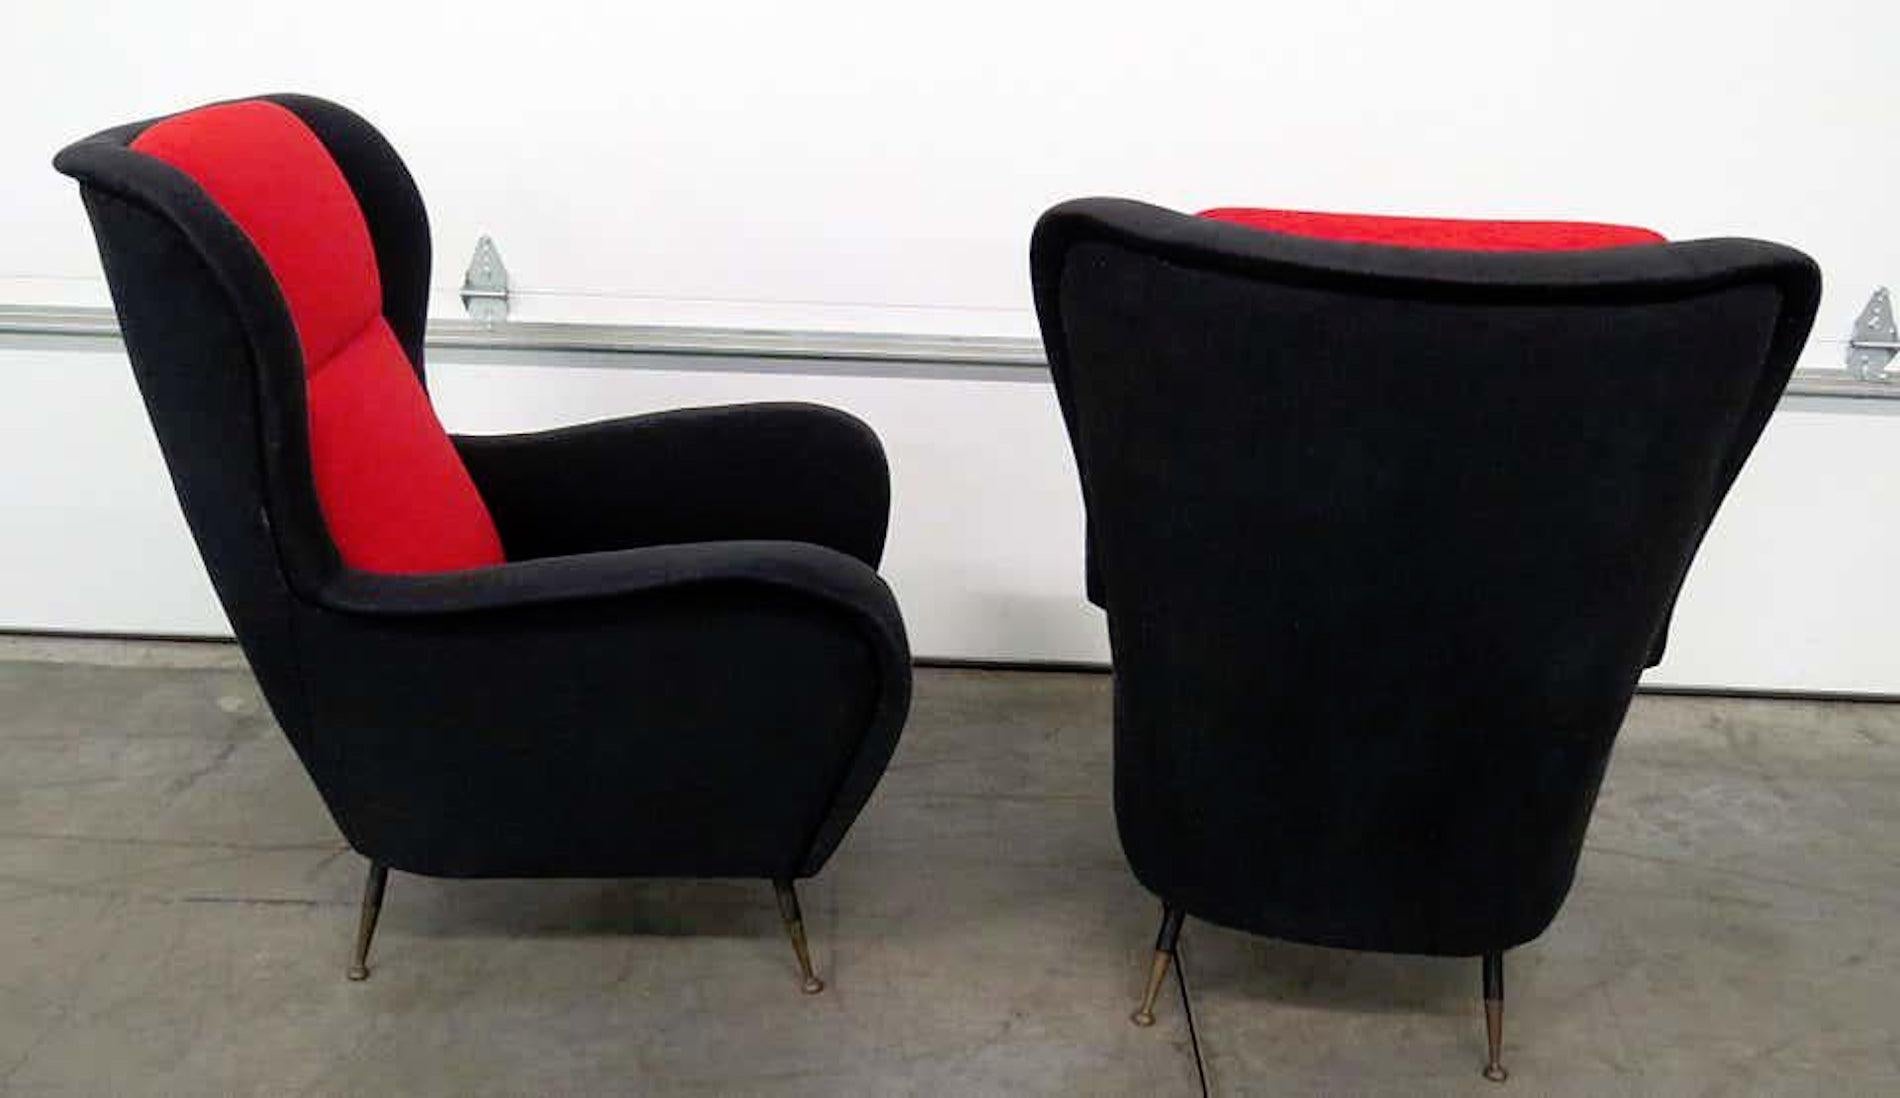 Pair of midcentury style two-tone chairs with brass tapered legs.
(Please confirm item location - NY or NJ - with dealer).
 